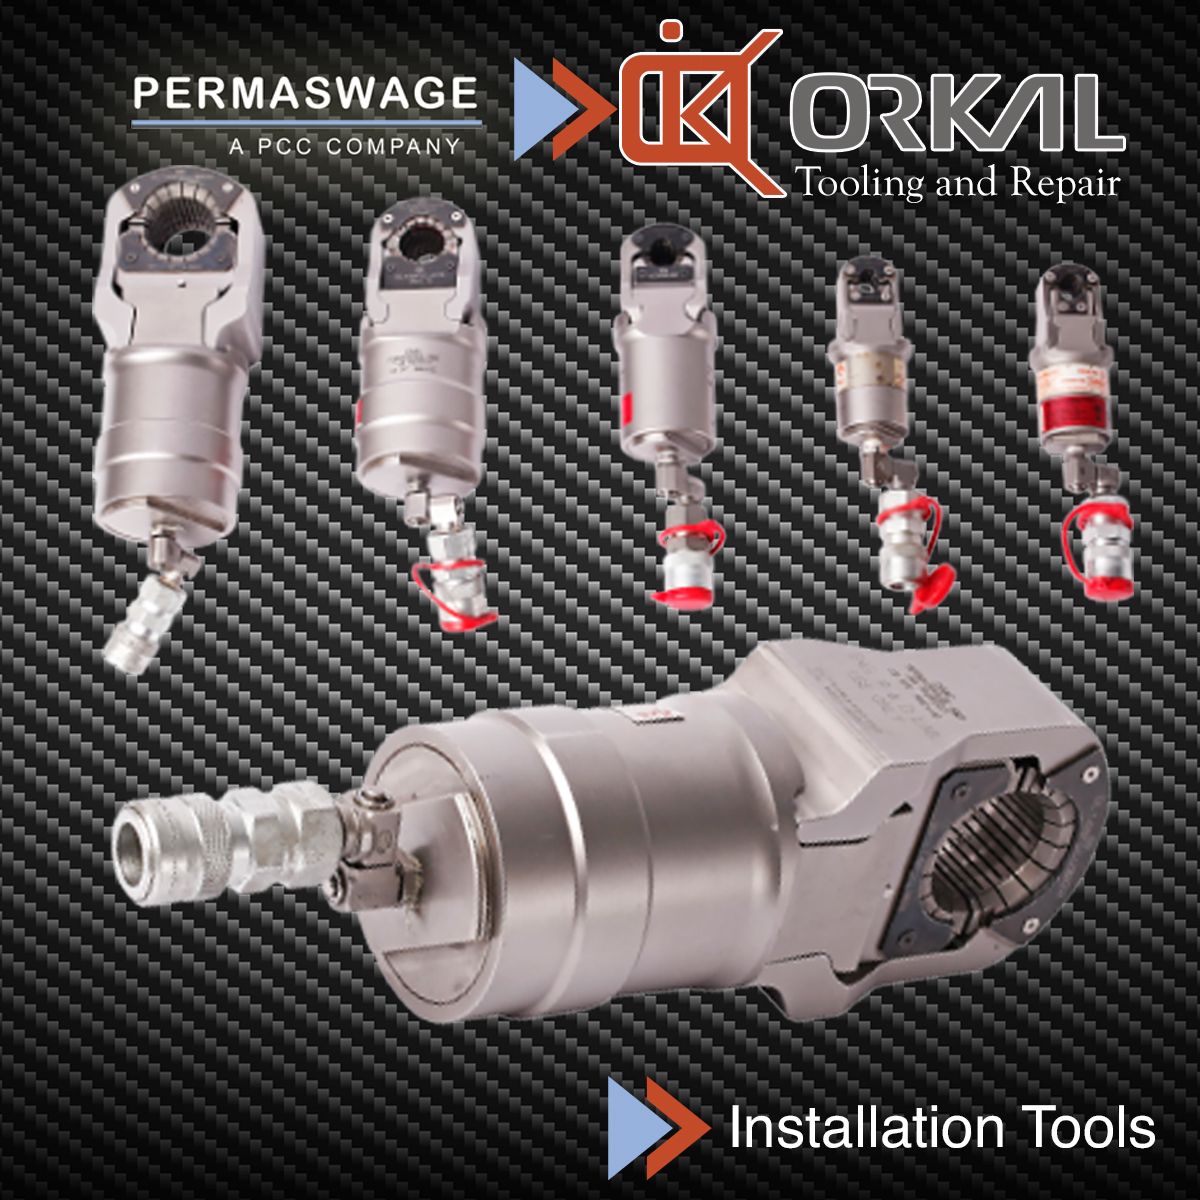 orkal, aircraft-grade installation tools on carbon fiber texture, featuring permaswage fittings & orkal industries tooling and repair, assembly solutions.